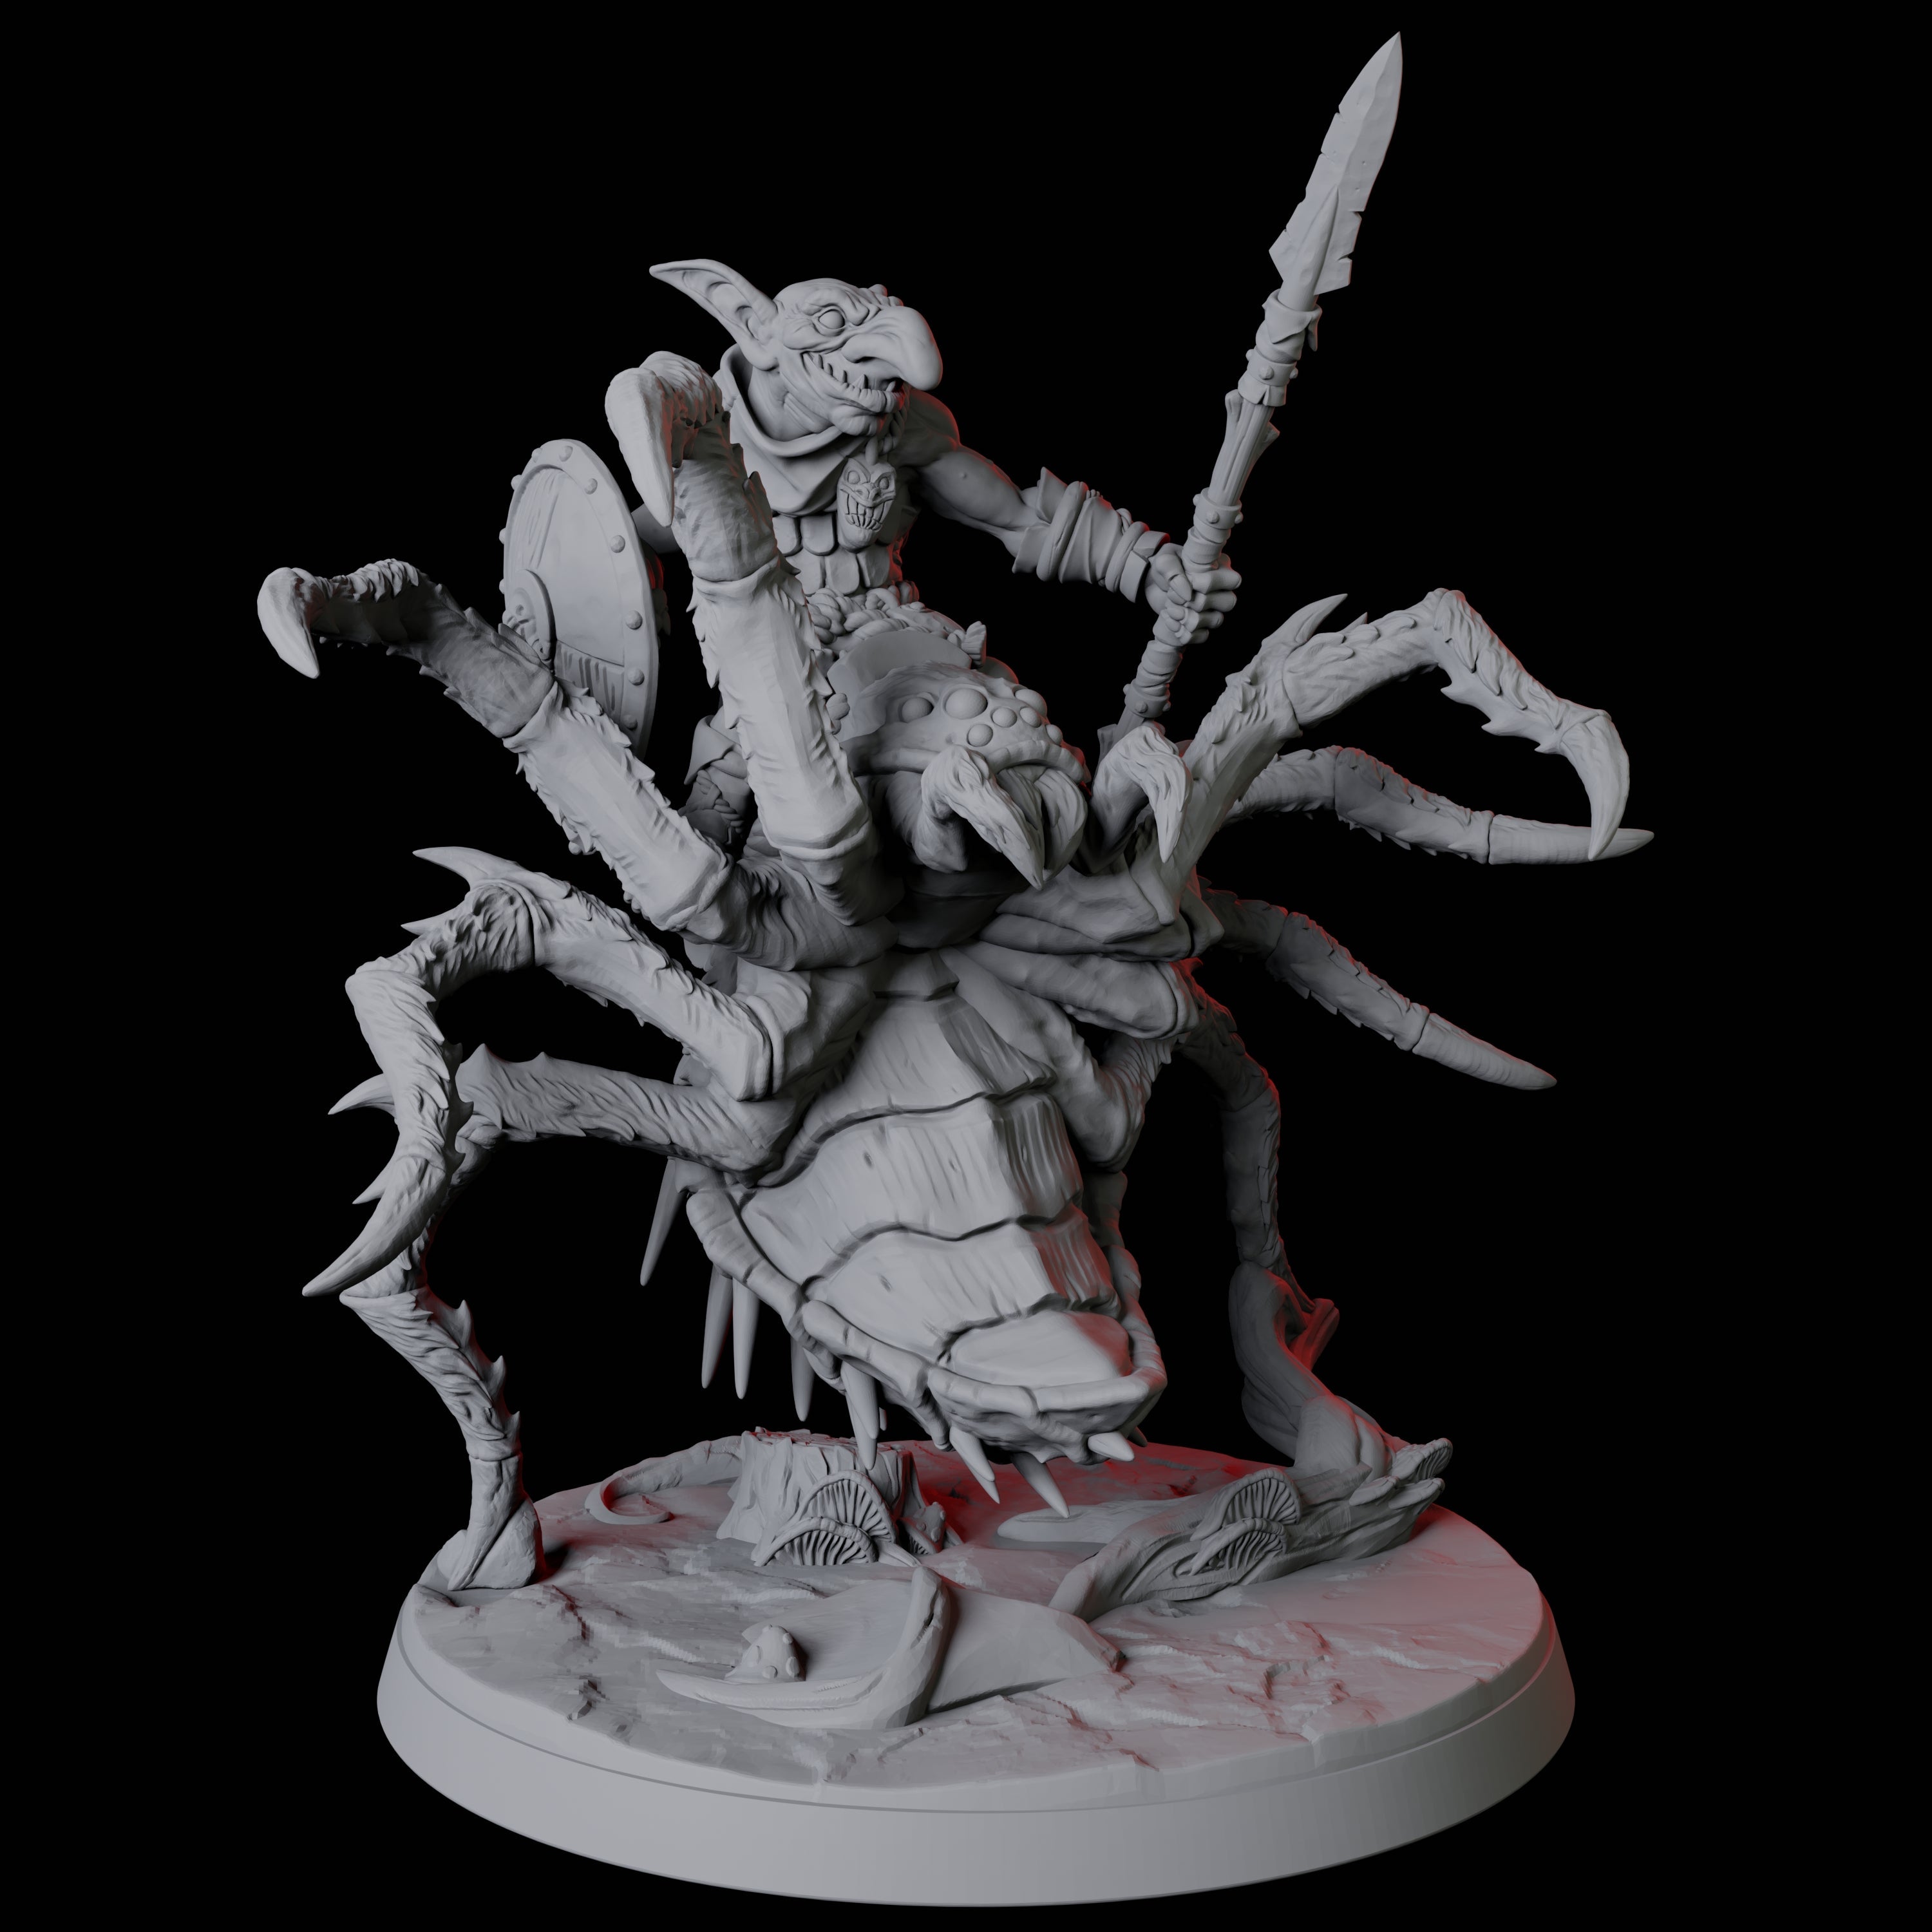 Four Spider Mounted Goblin Riders Miniature for Dungeons and Dragons, Pathfinder or other TTRPGs